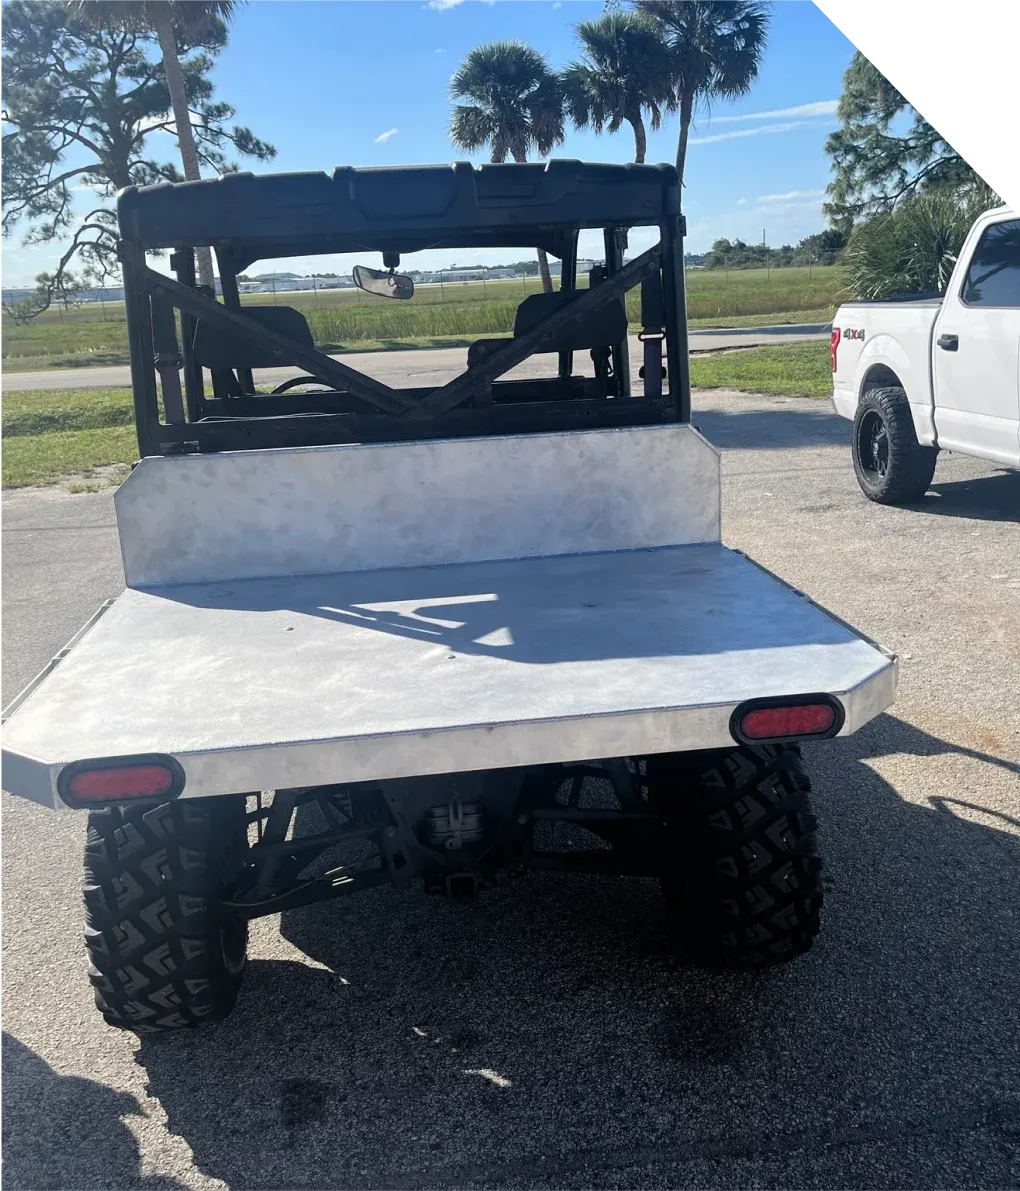 Expert flatbed fabrication services in Fort Pierce, FL and serving the entire Treasure Coast